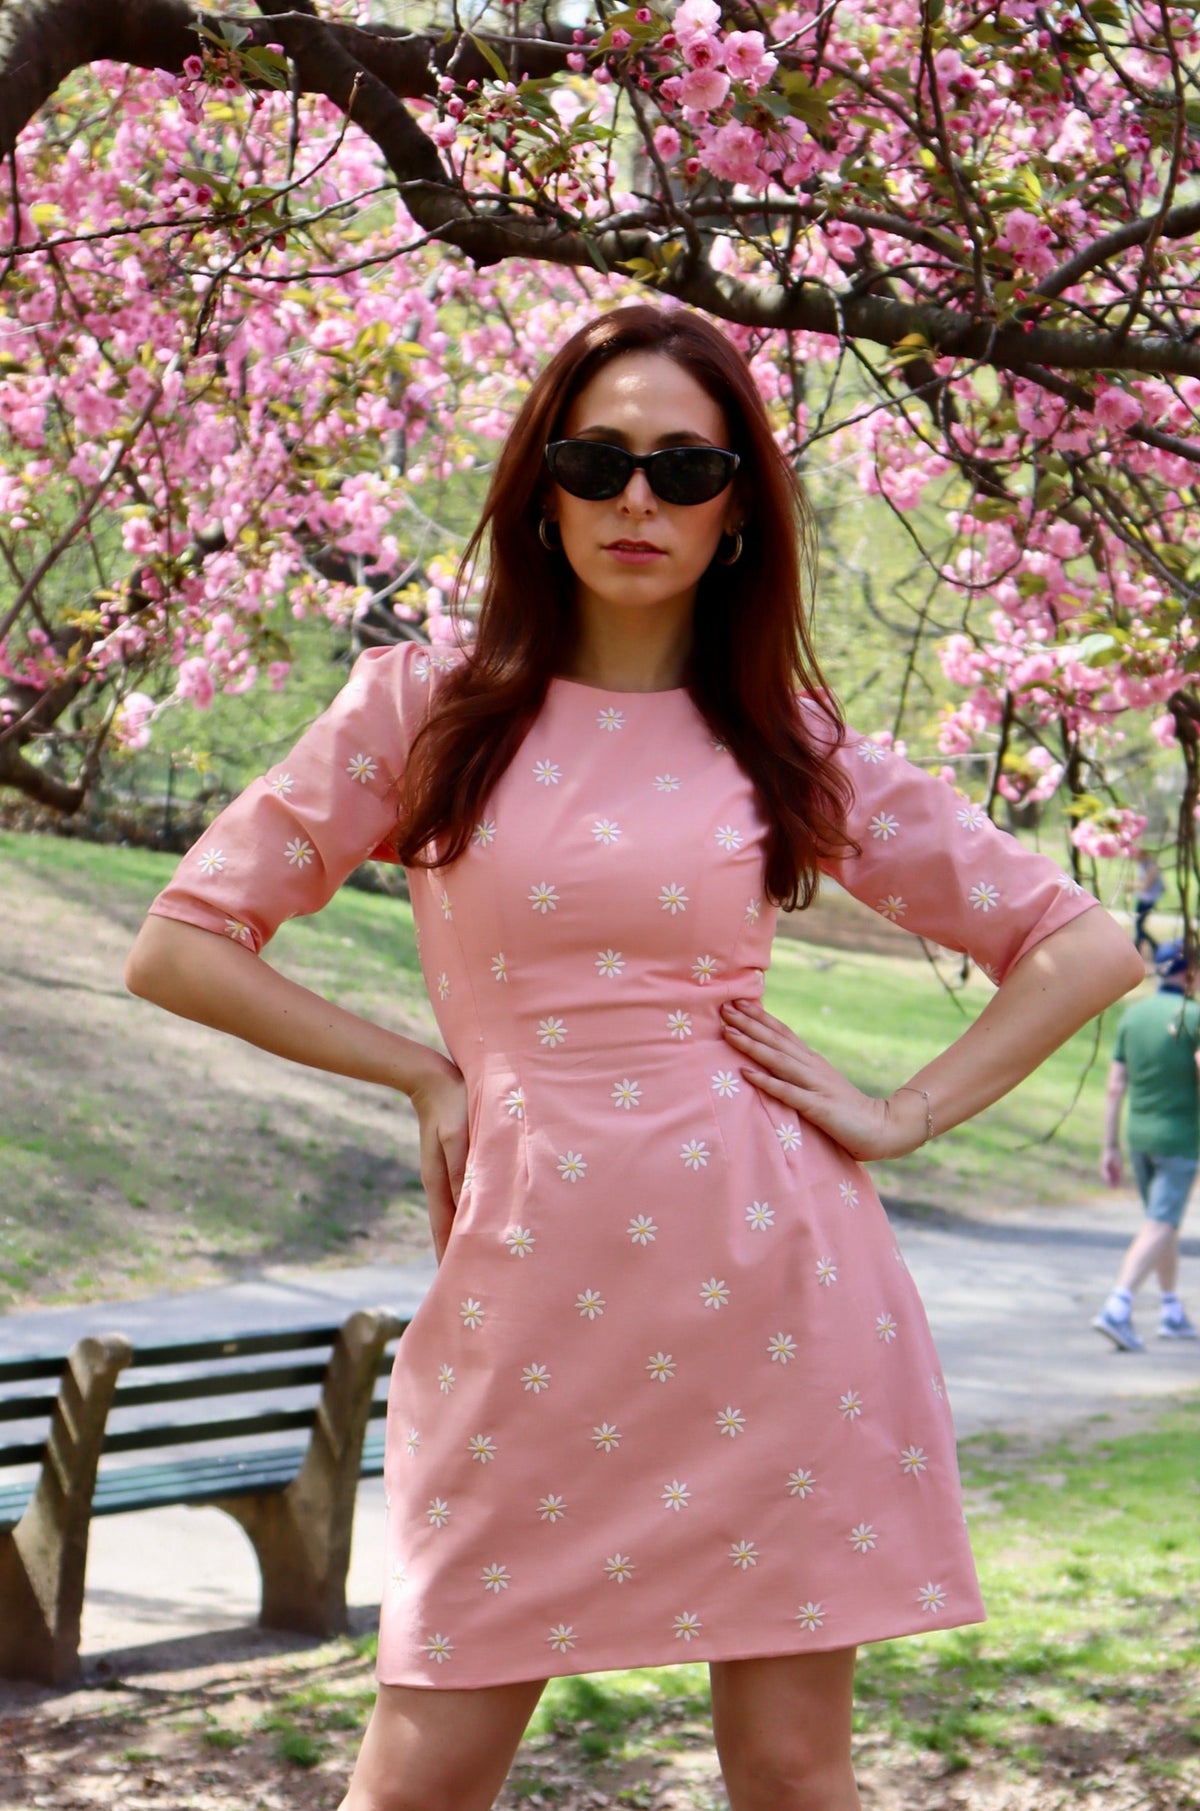 Model in peachy pink short dress with white daisy appliques in front of a cherry tree.